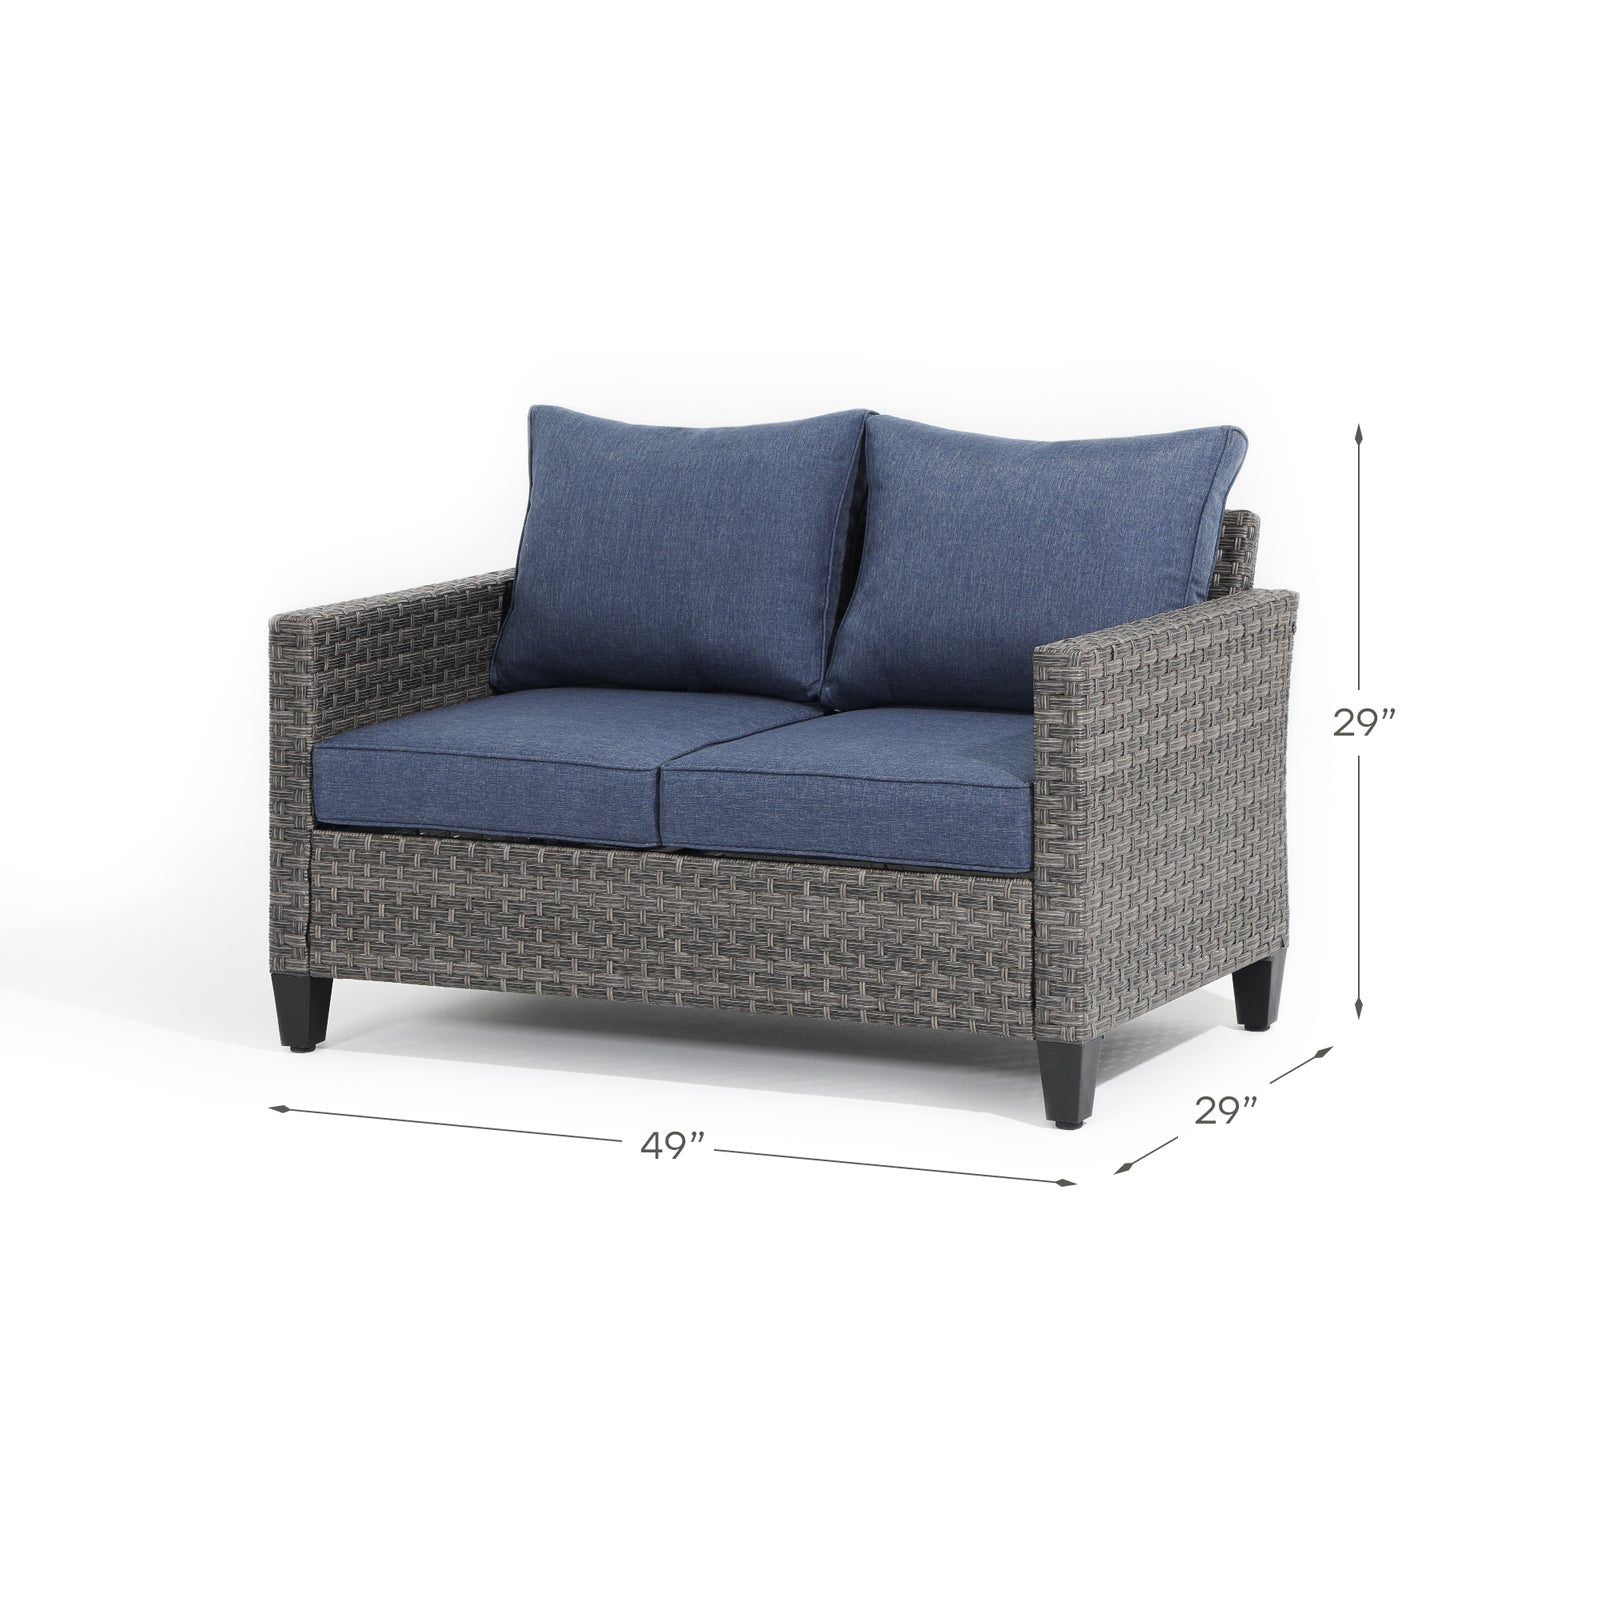 Ayia grey loveseat with rattan design, navy blue cushions, dimension information  - Jardina Furniture #color_Navy blue